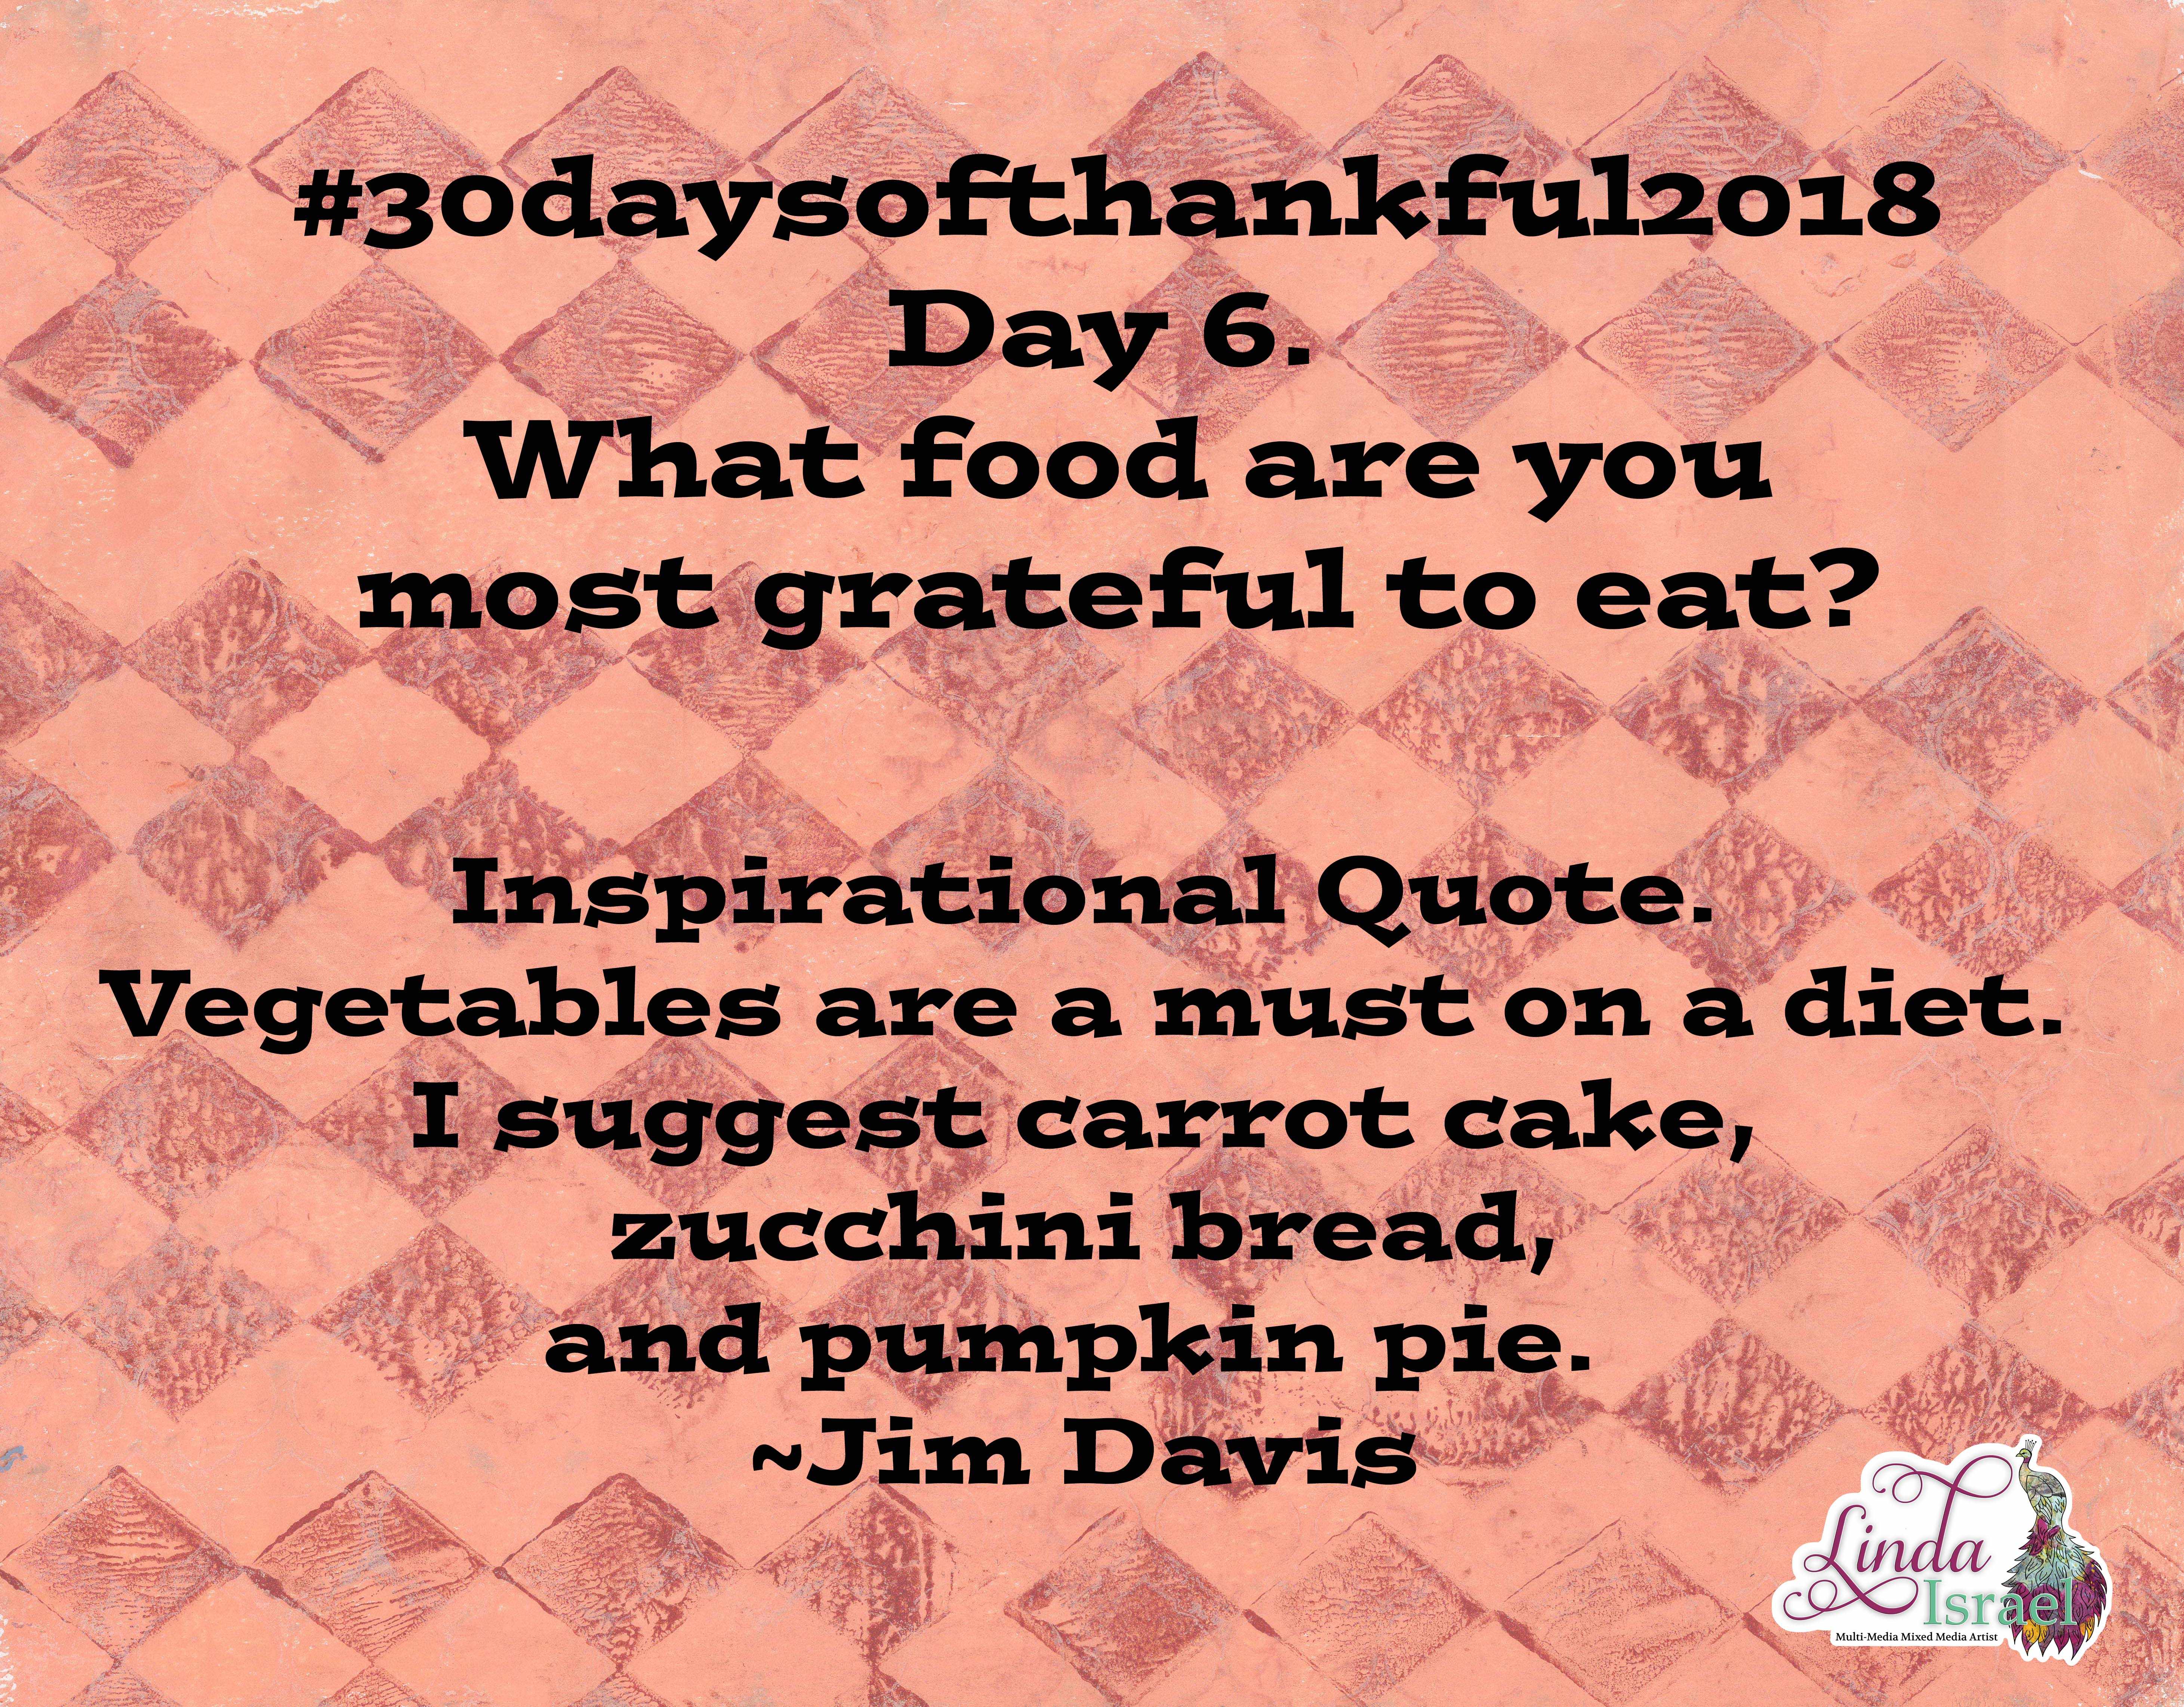 Day 6 of 30 days of Thankful 2018